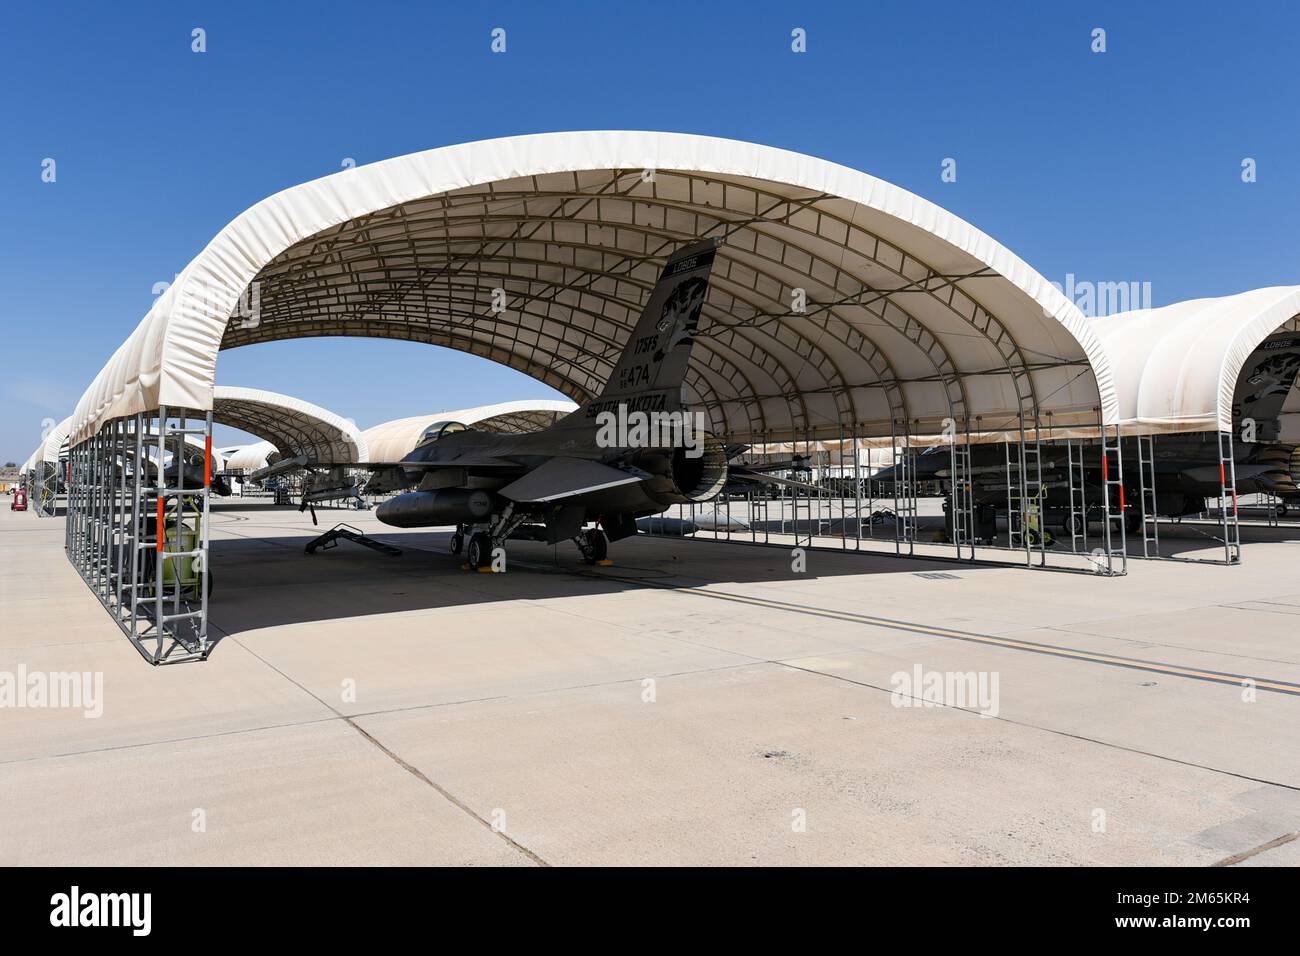 F-16 Fighting Falcons assigned to the 114th Fighter Wing park under a sun shade during Weapons and Tactics Instructor (WTI) course 2-22 at Marine Corps Air Station Yuma, Ariz., April 4, 2022. WTI is a seven-week training event hosted by Marine Aviation Weapons and Tactics Squadron One (MAWTS-1), providing standardized advanced tactical training and certification of unit instructor qualifications to support Marine aviation training and readiness, and assists in developing and employing aviation weapons and tactics. Stock Photo